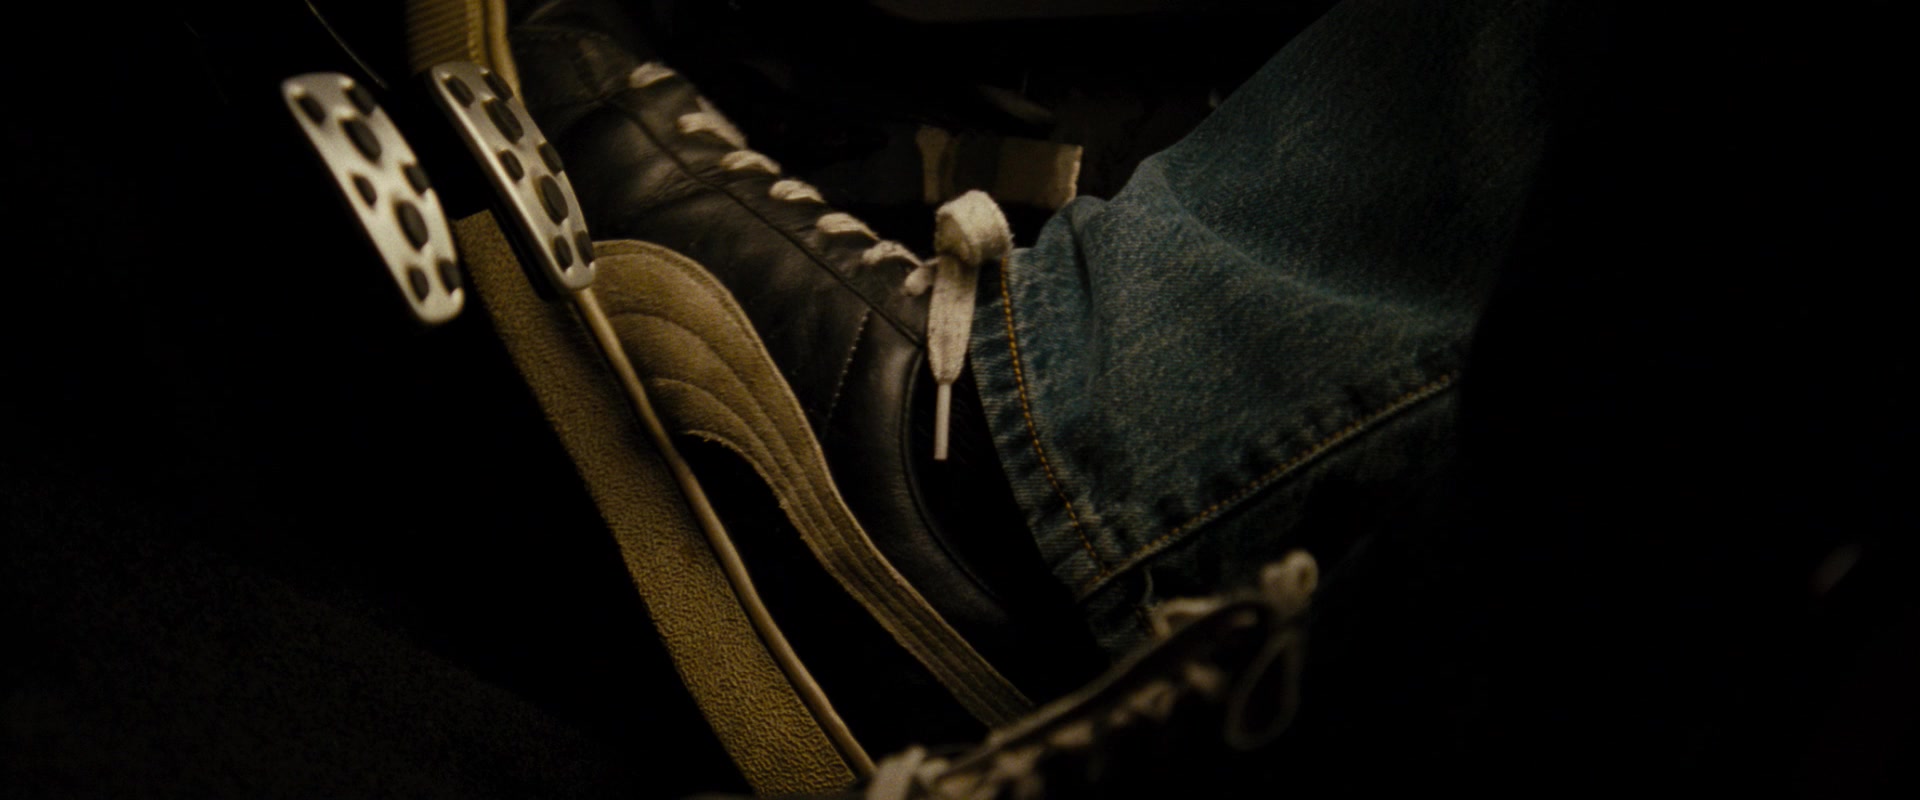 Puma Leather Black Sneakers Of Paul Walker As Brian O'Conner In Fast & (2009)